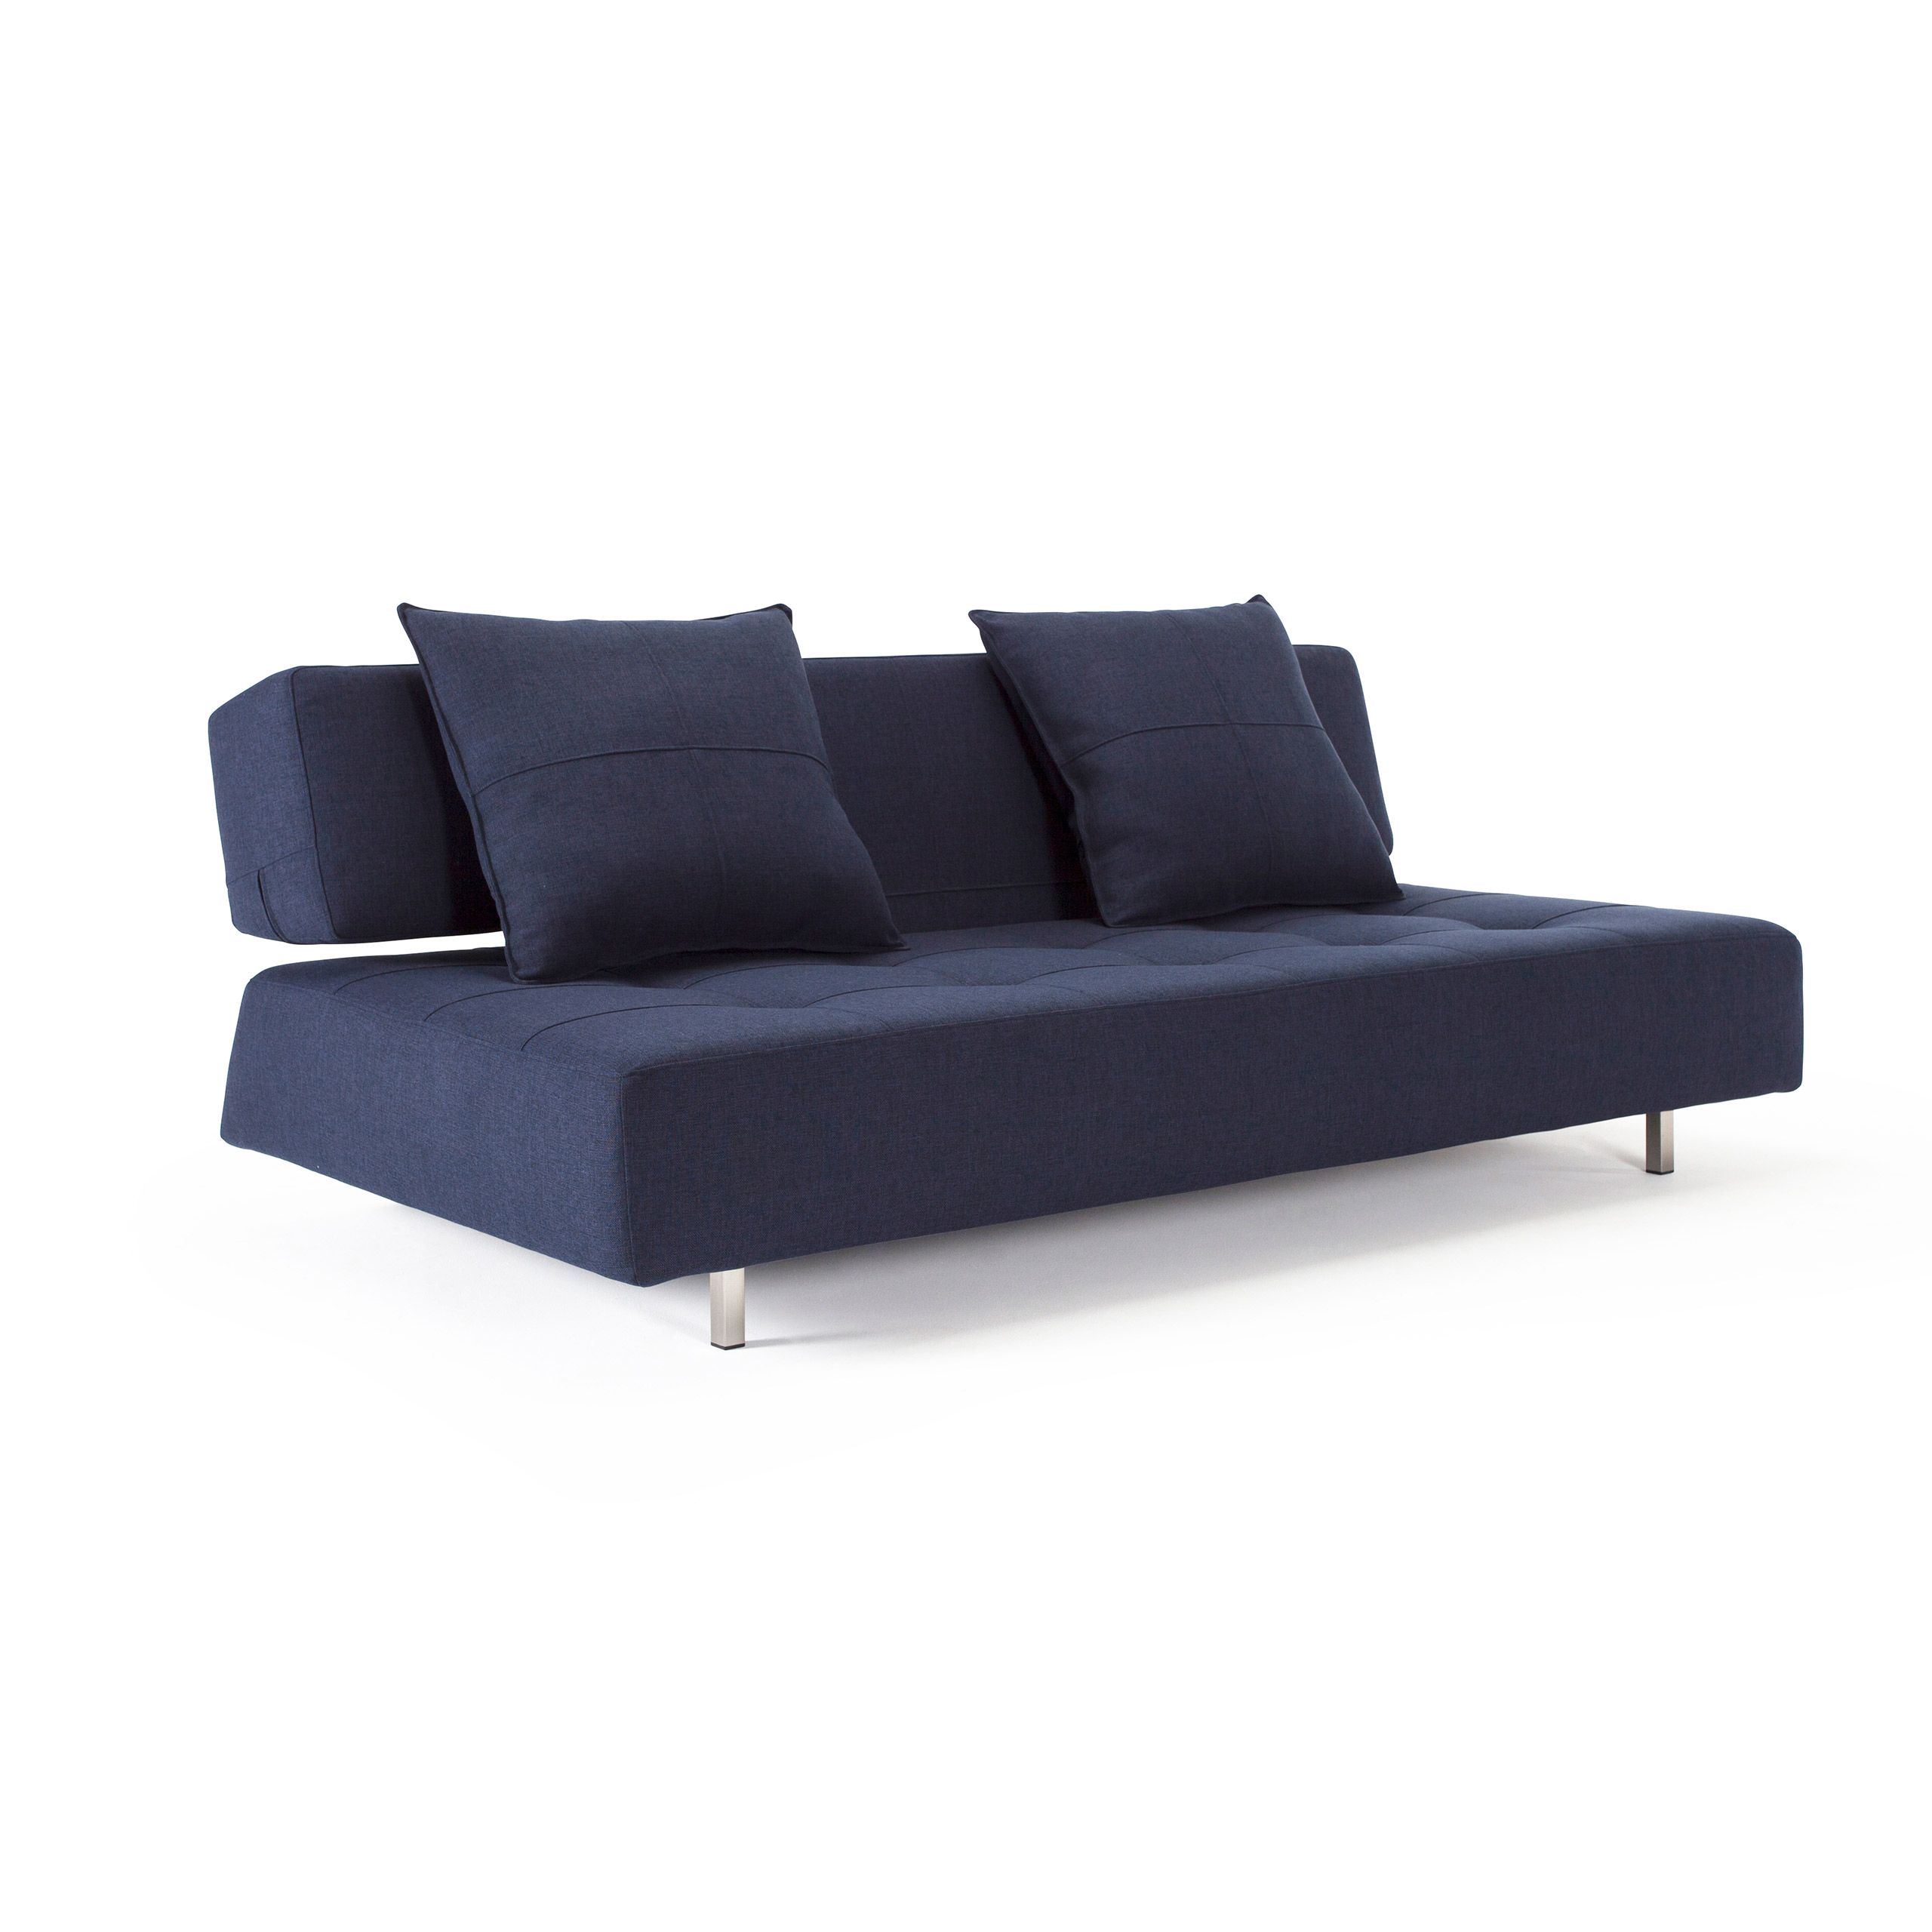 Long Horn Sofa Bed features multifunctional mobility